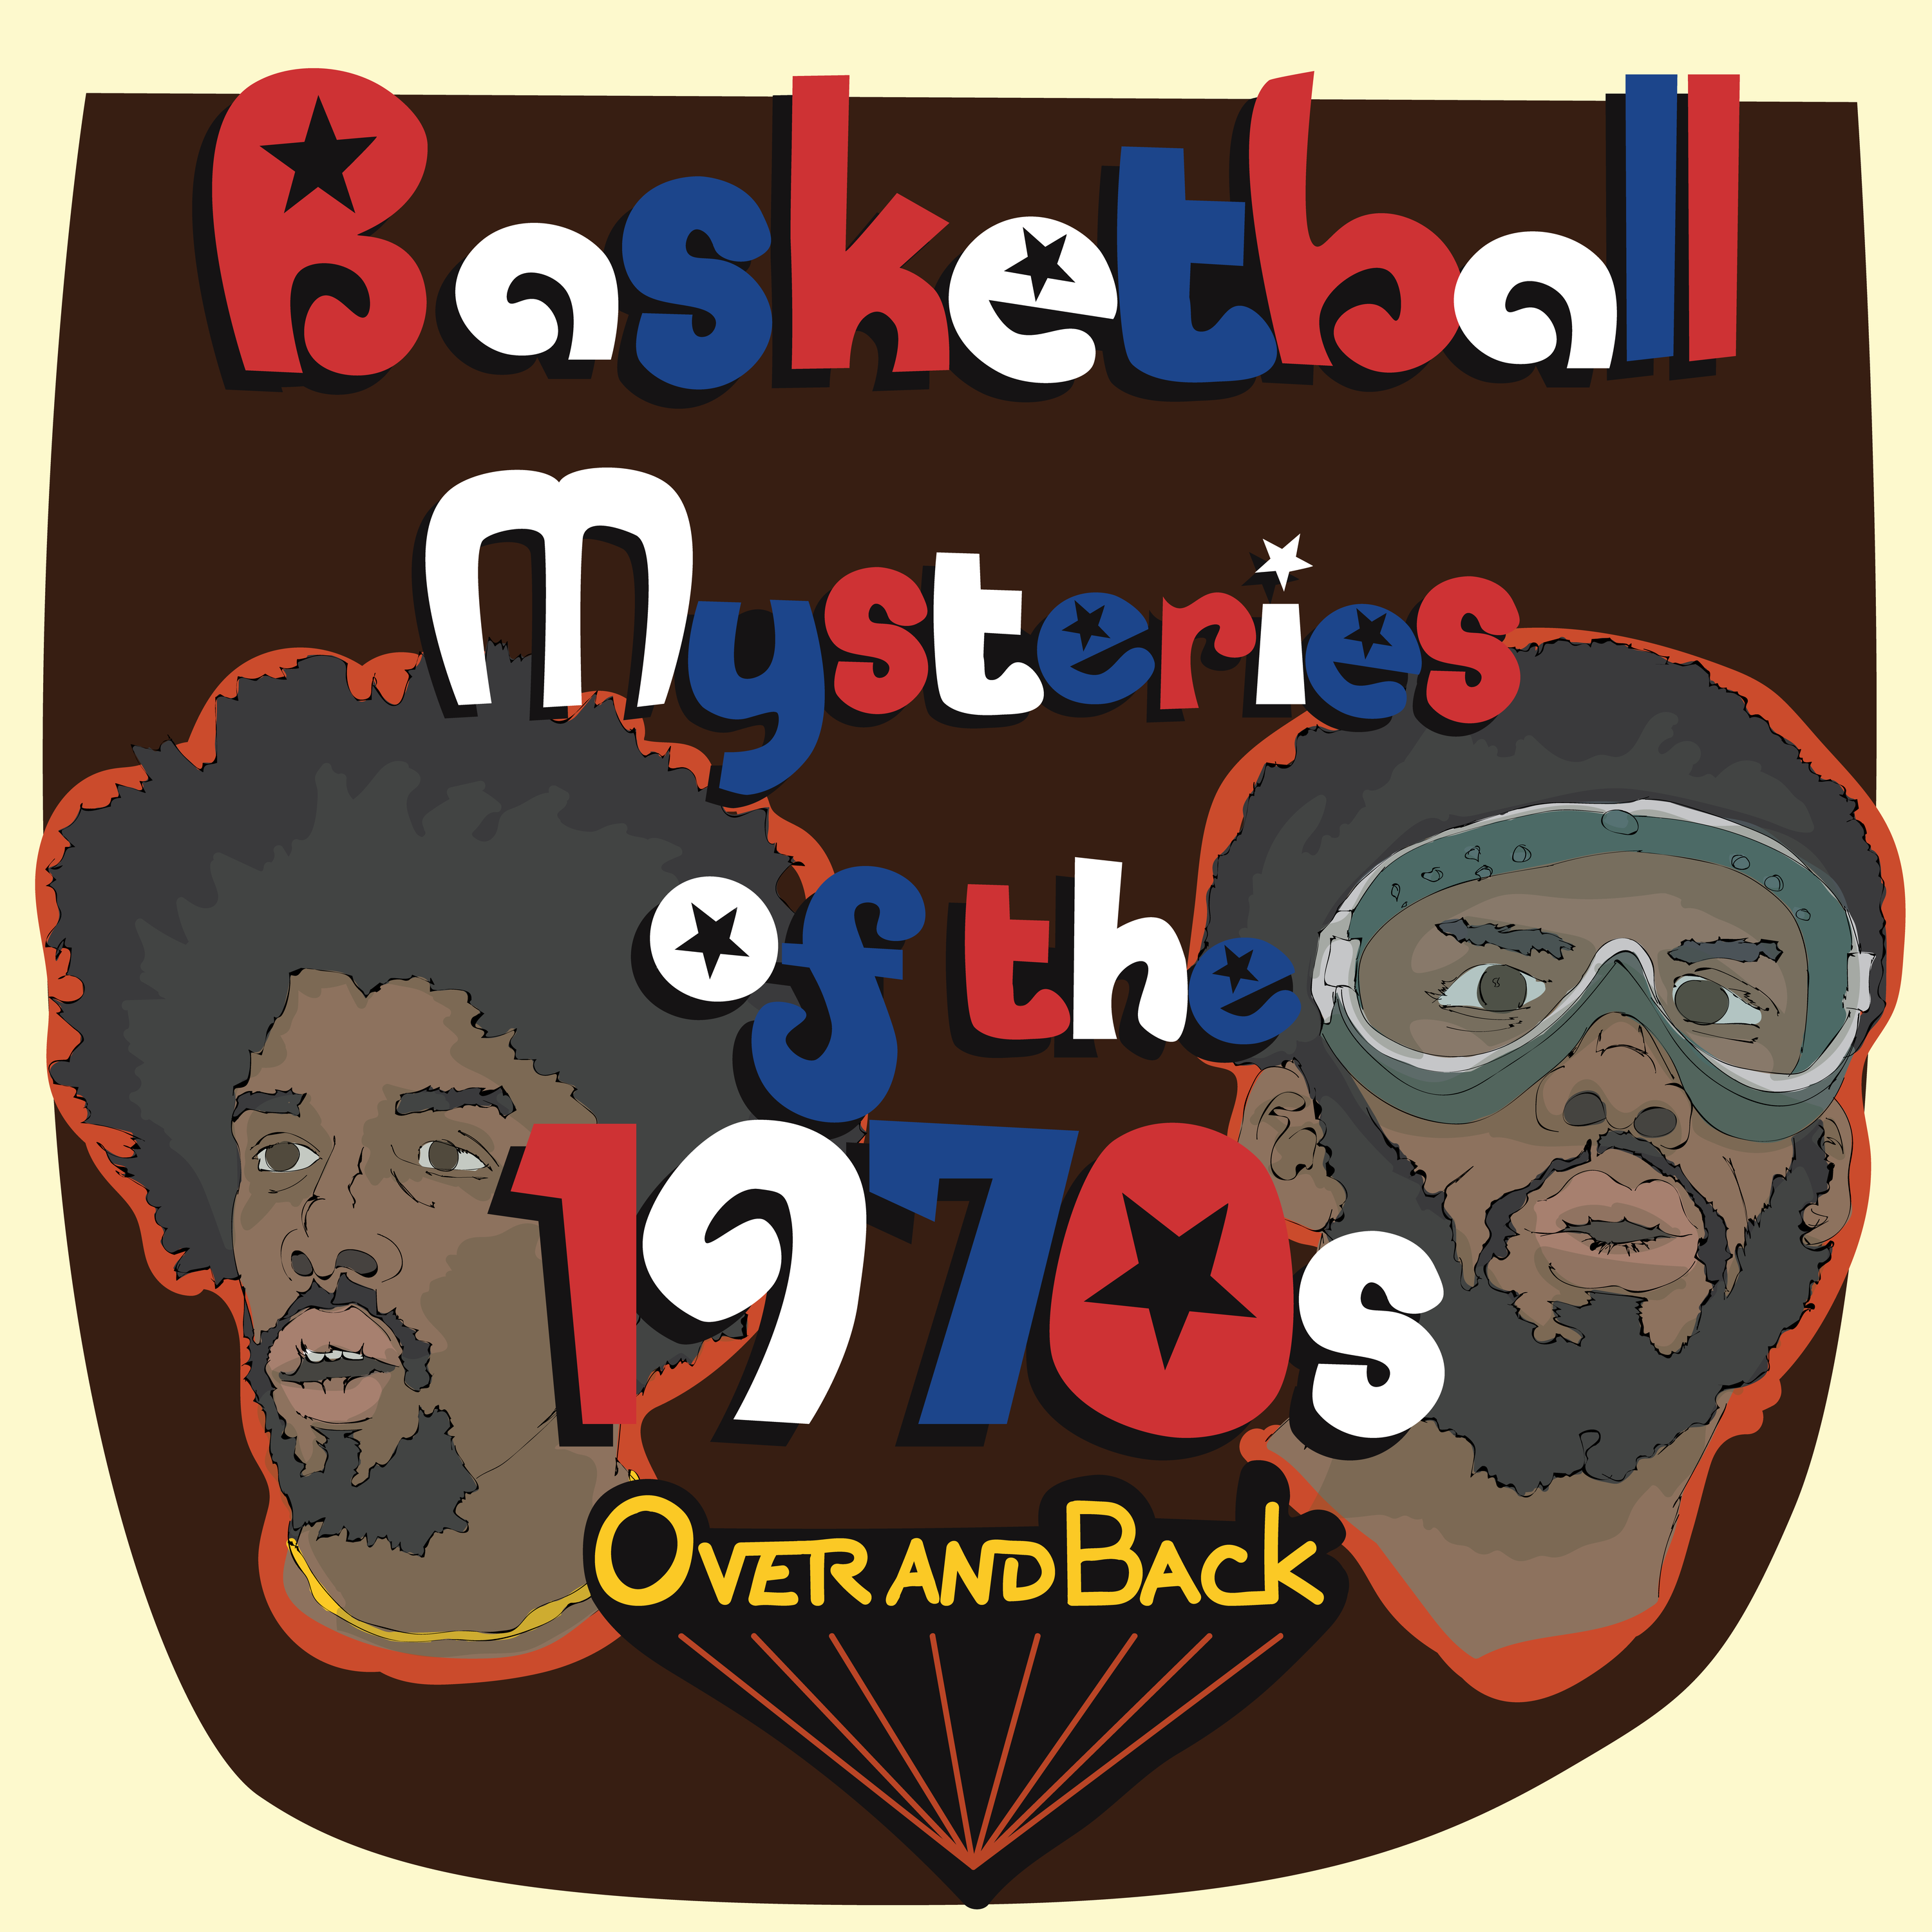 Why did the ABA’s first two champs skip town? (Basketball Mysteries of the 1970s #4)